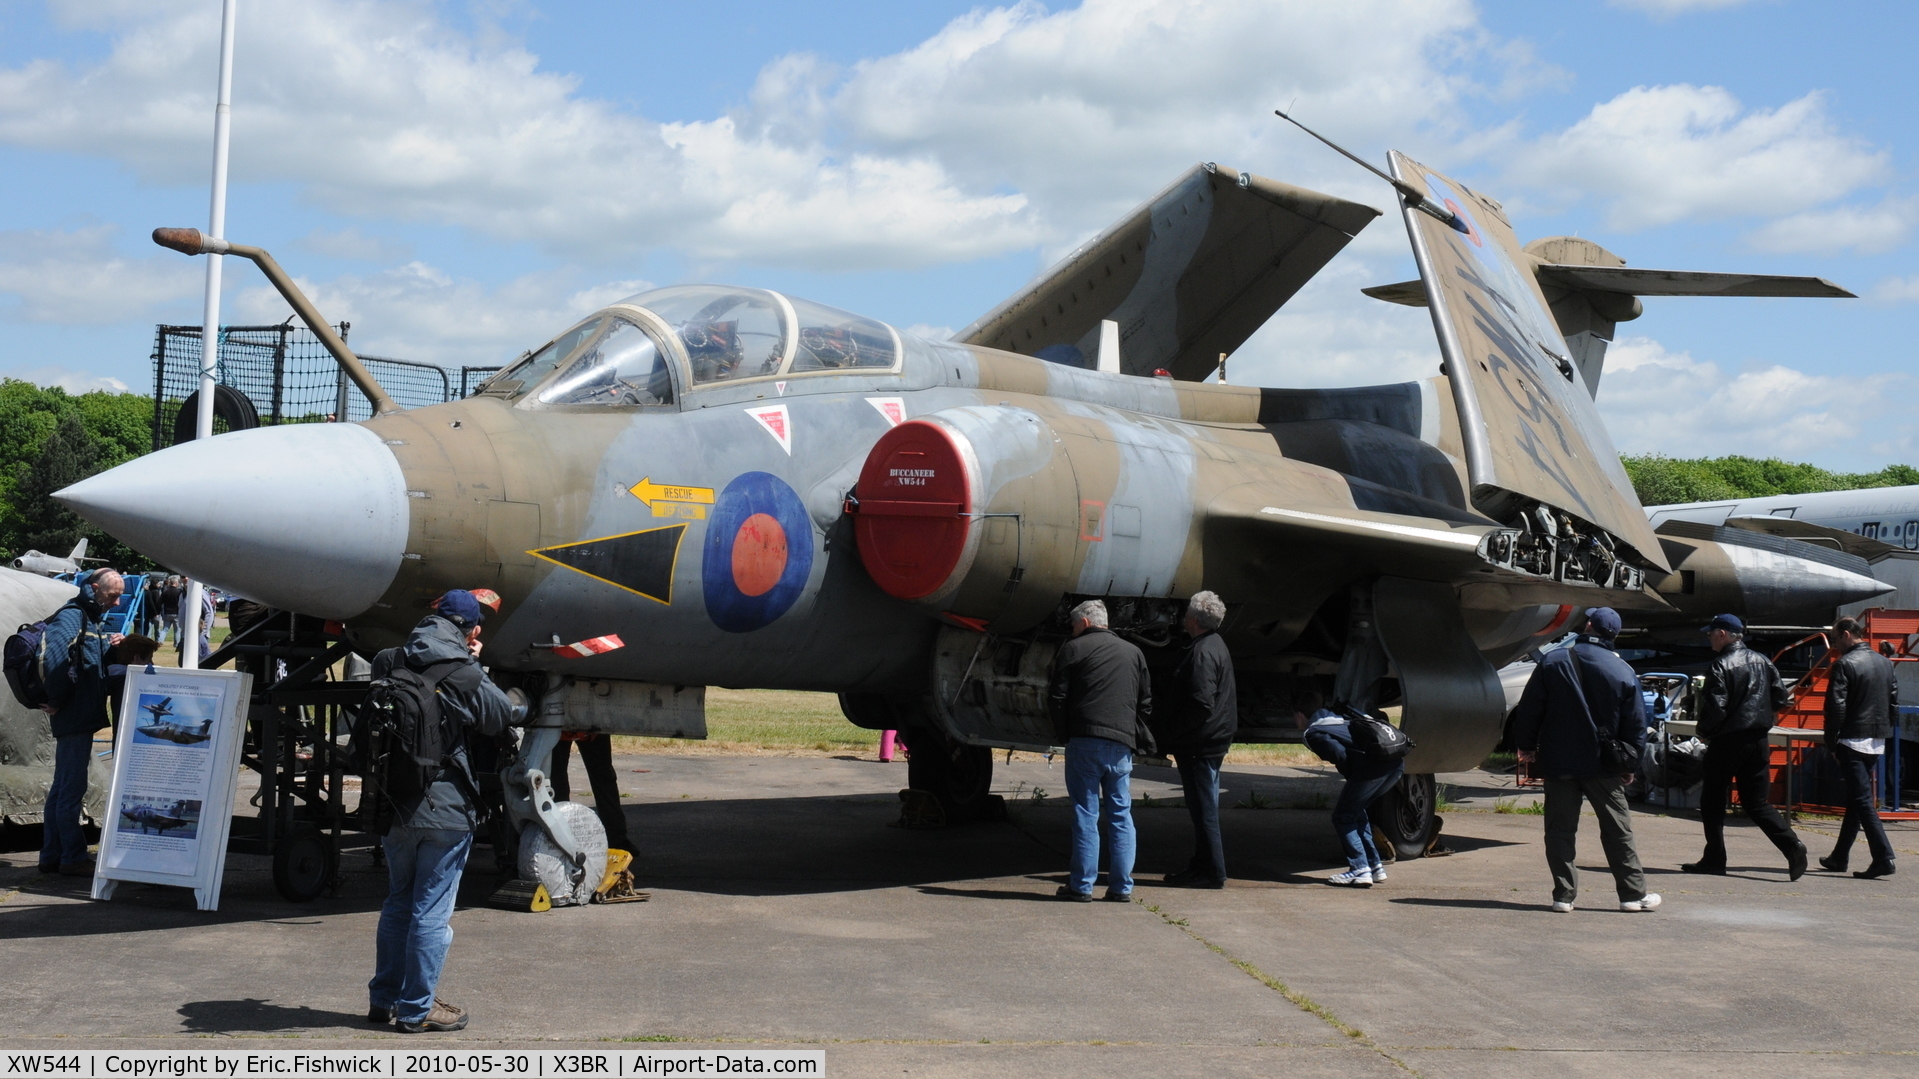 XW544, 1972 Hawker Siddeley Buccaneer S.2B C/N B3-05-71, XW544 at Bruntingthorpe Cold War Jets Open Day - May 2010